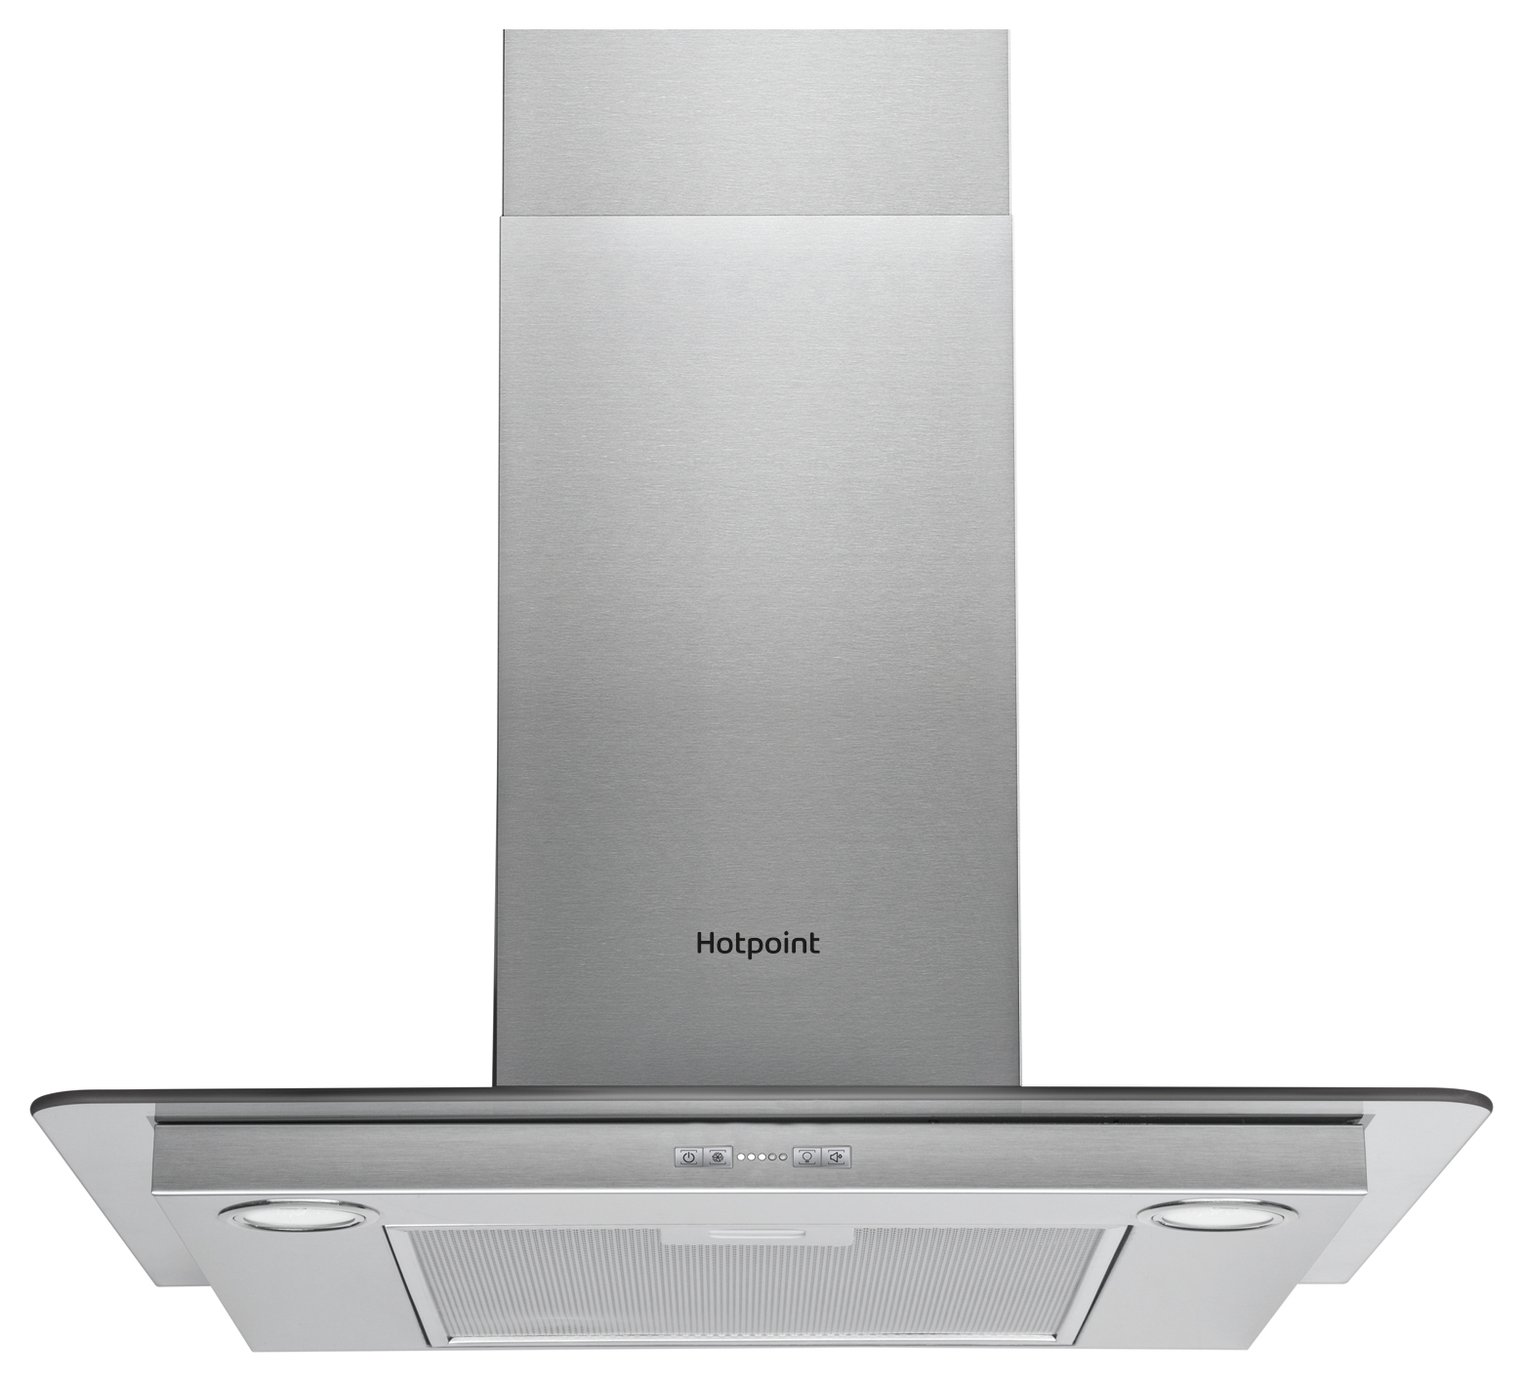 Hotpoint PHFG7 5FABX 70CM Cooker Hood - Stainless Steel